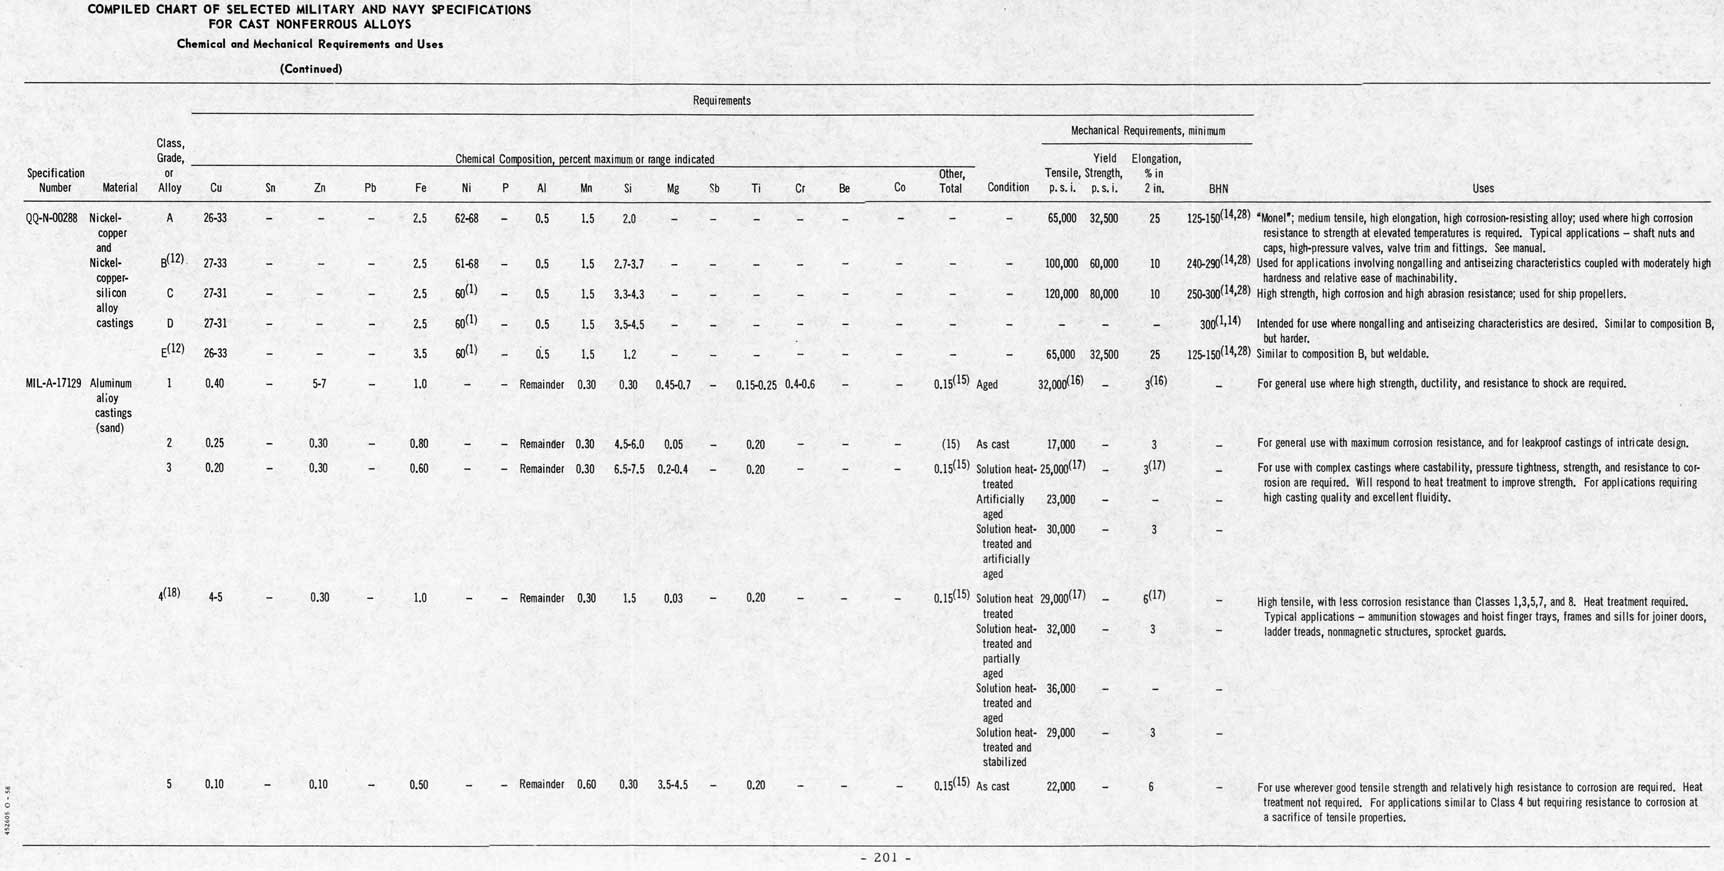 COMPILED CHART OF SELECTED MILITARY AND NAVY SPECIFICATIONS FOR CAST NONFERROUS ALLOYS